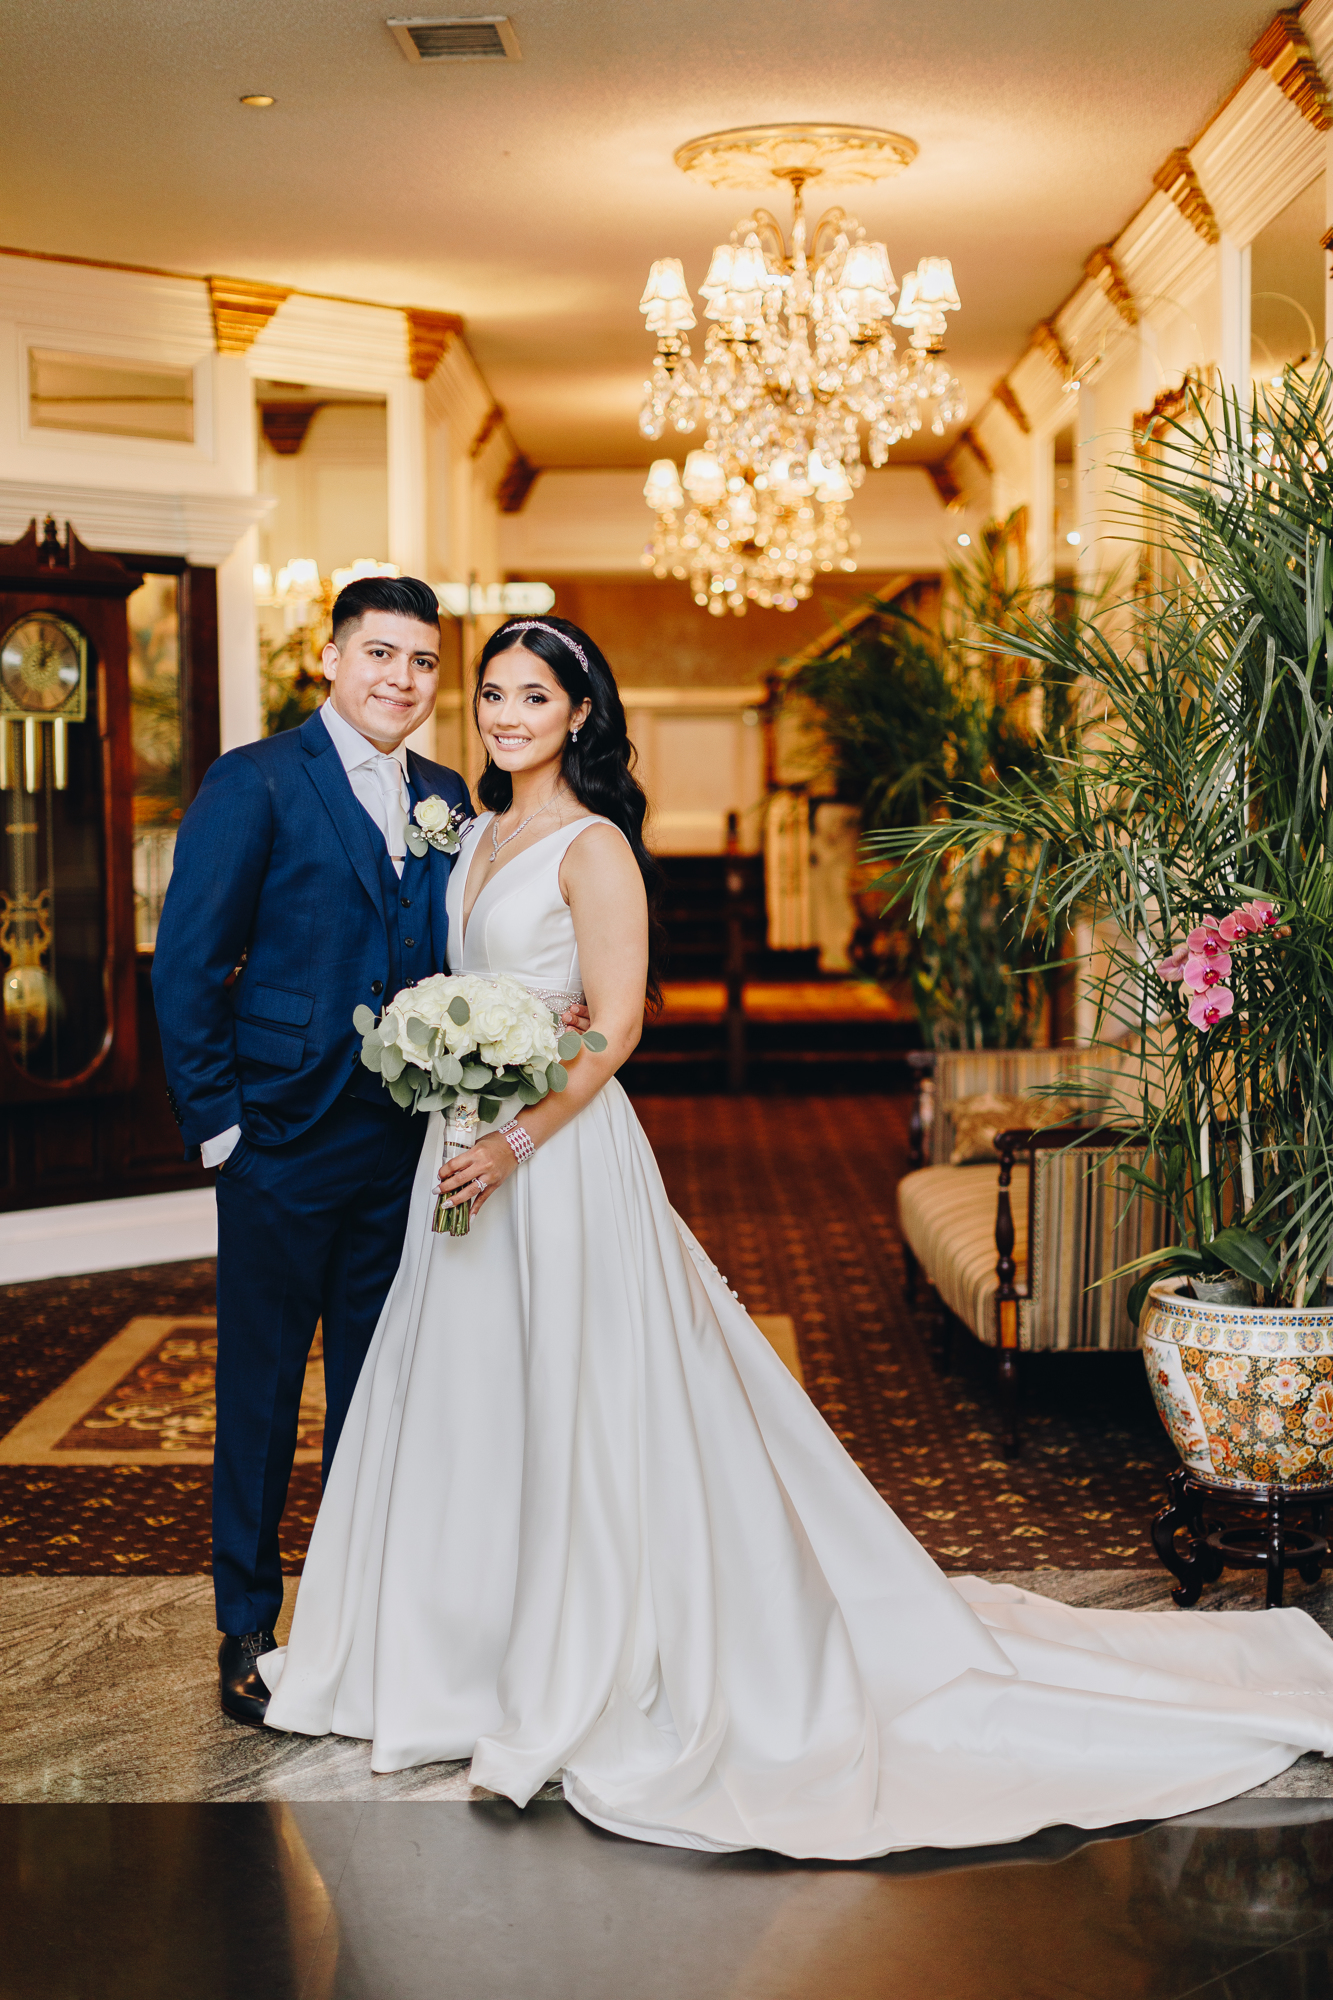 Wedding photography in NJ at the Brownstone